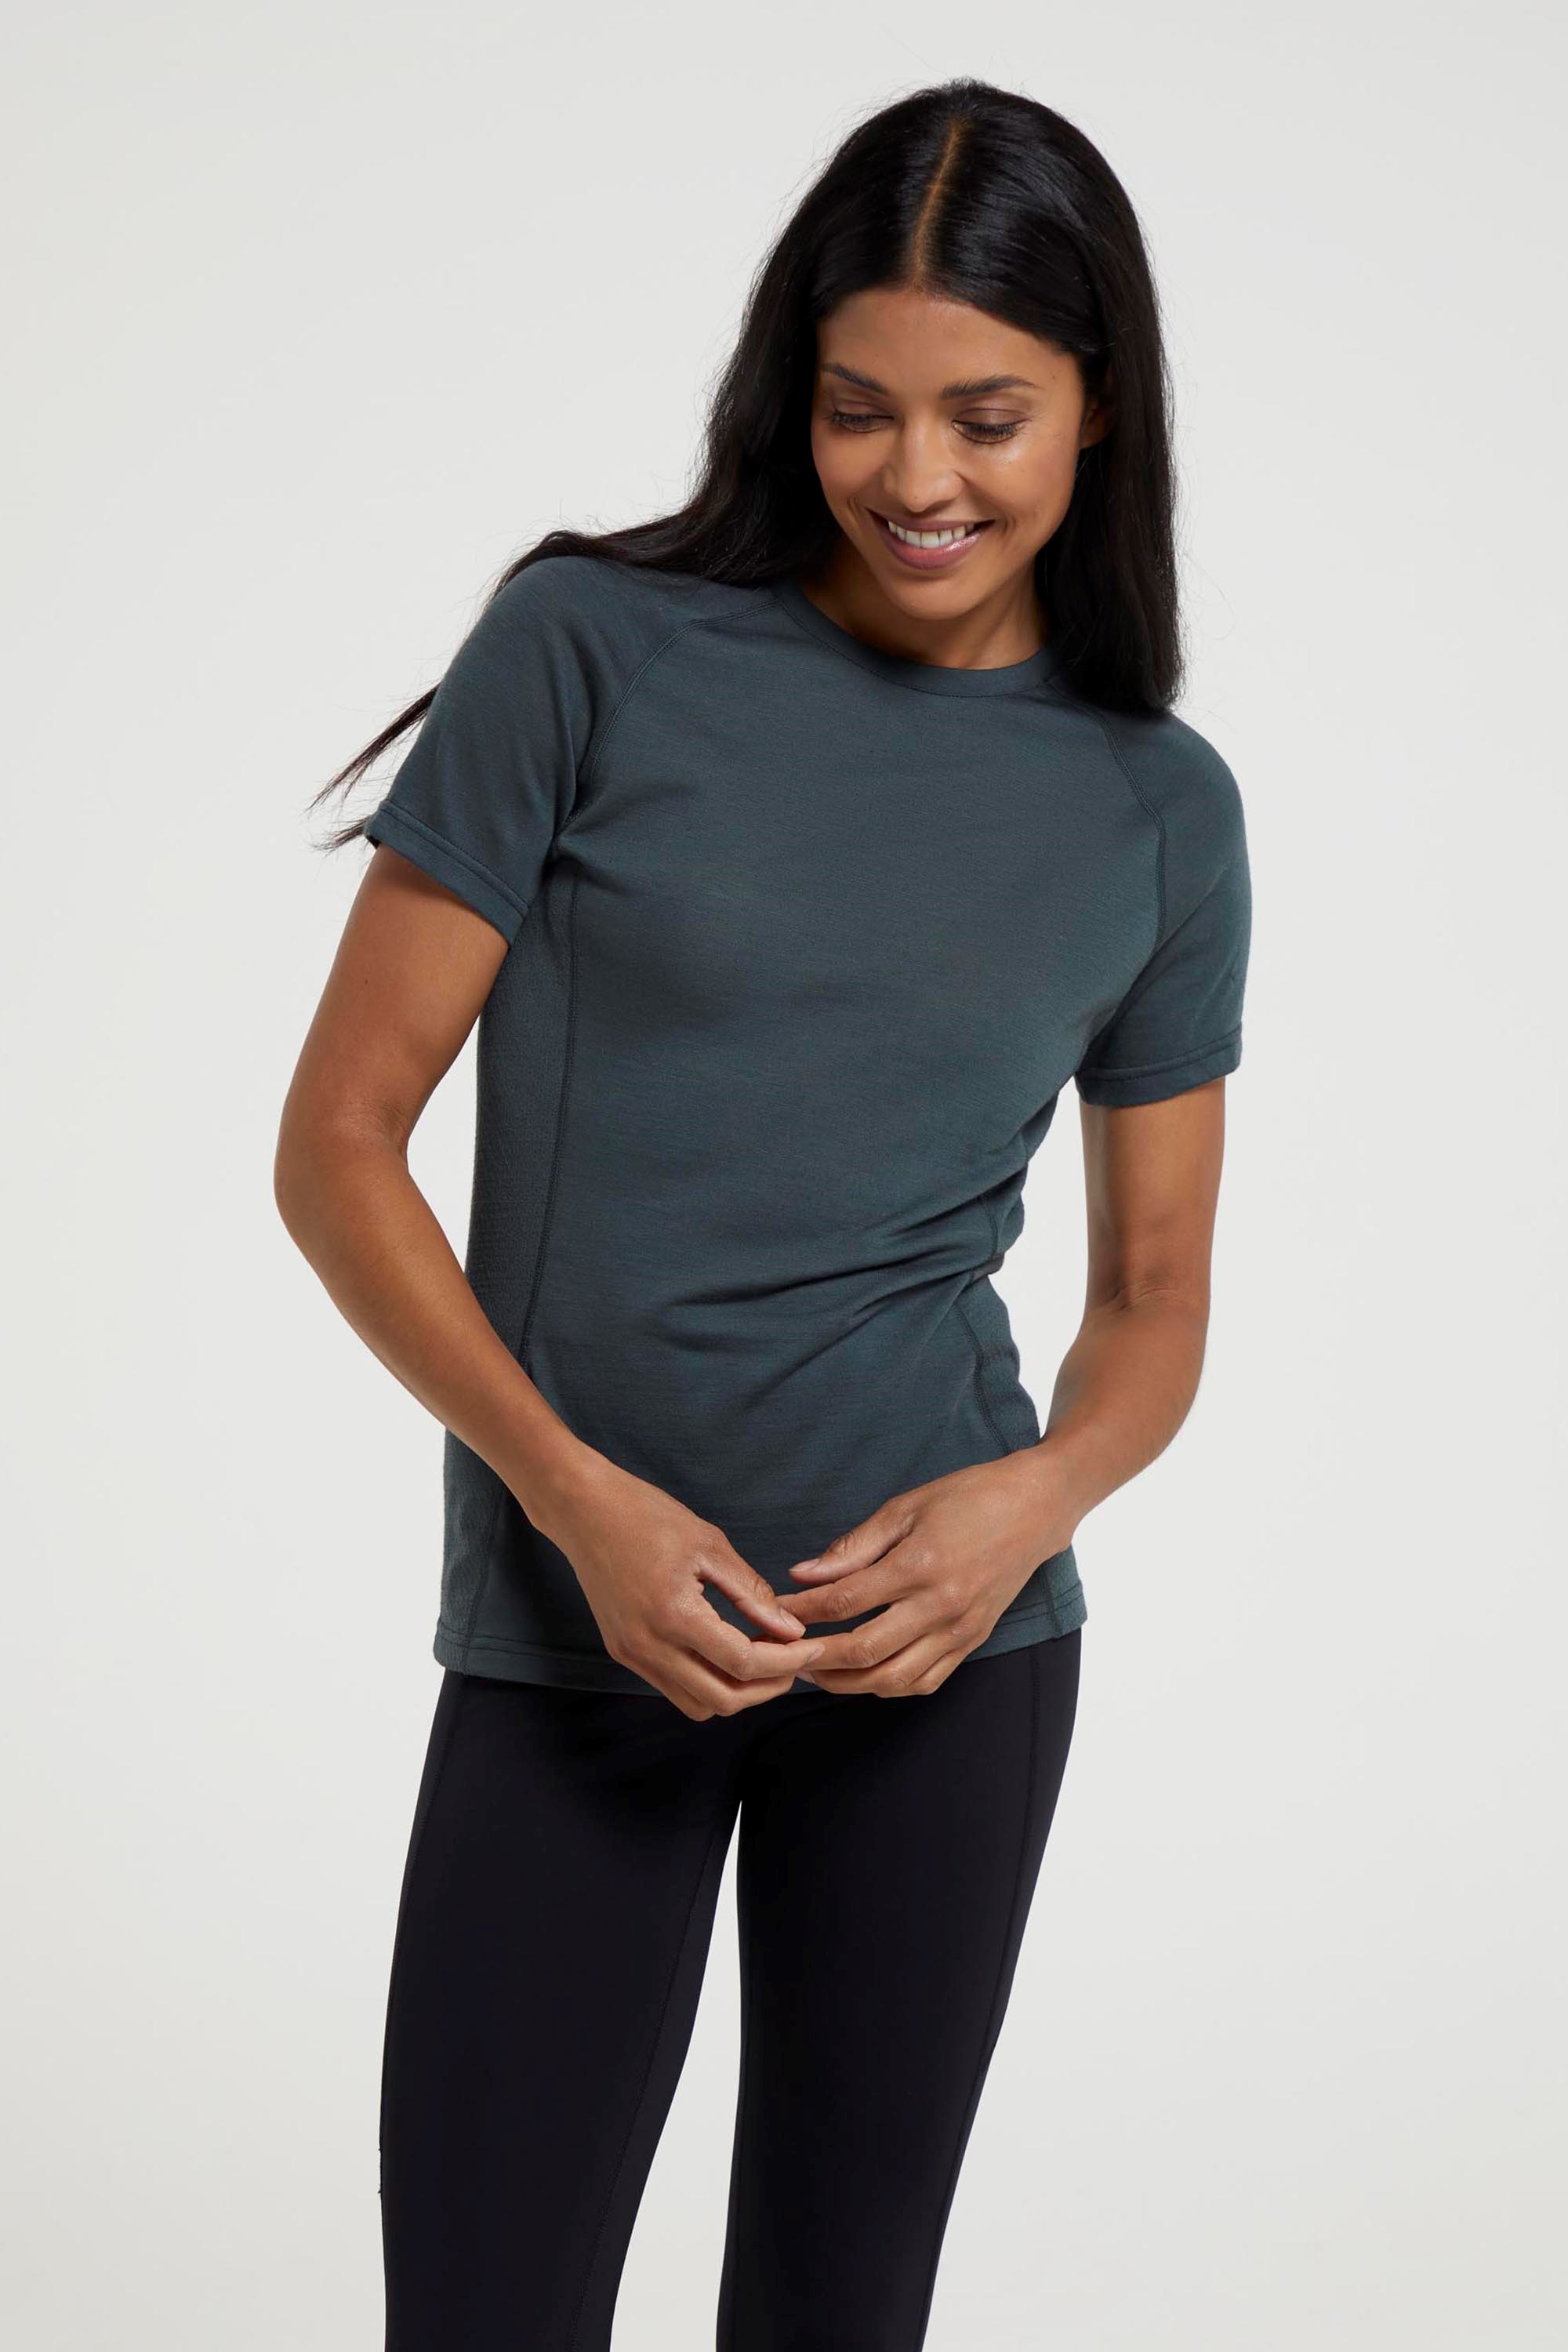 Merino Wool Thermal Set: Womens Midweight Base Layer With Anti Odor Top &  Bottoms From Diao03, $55